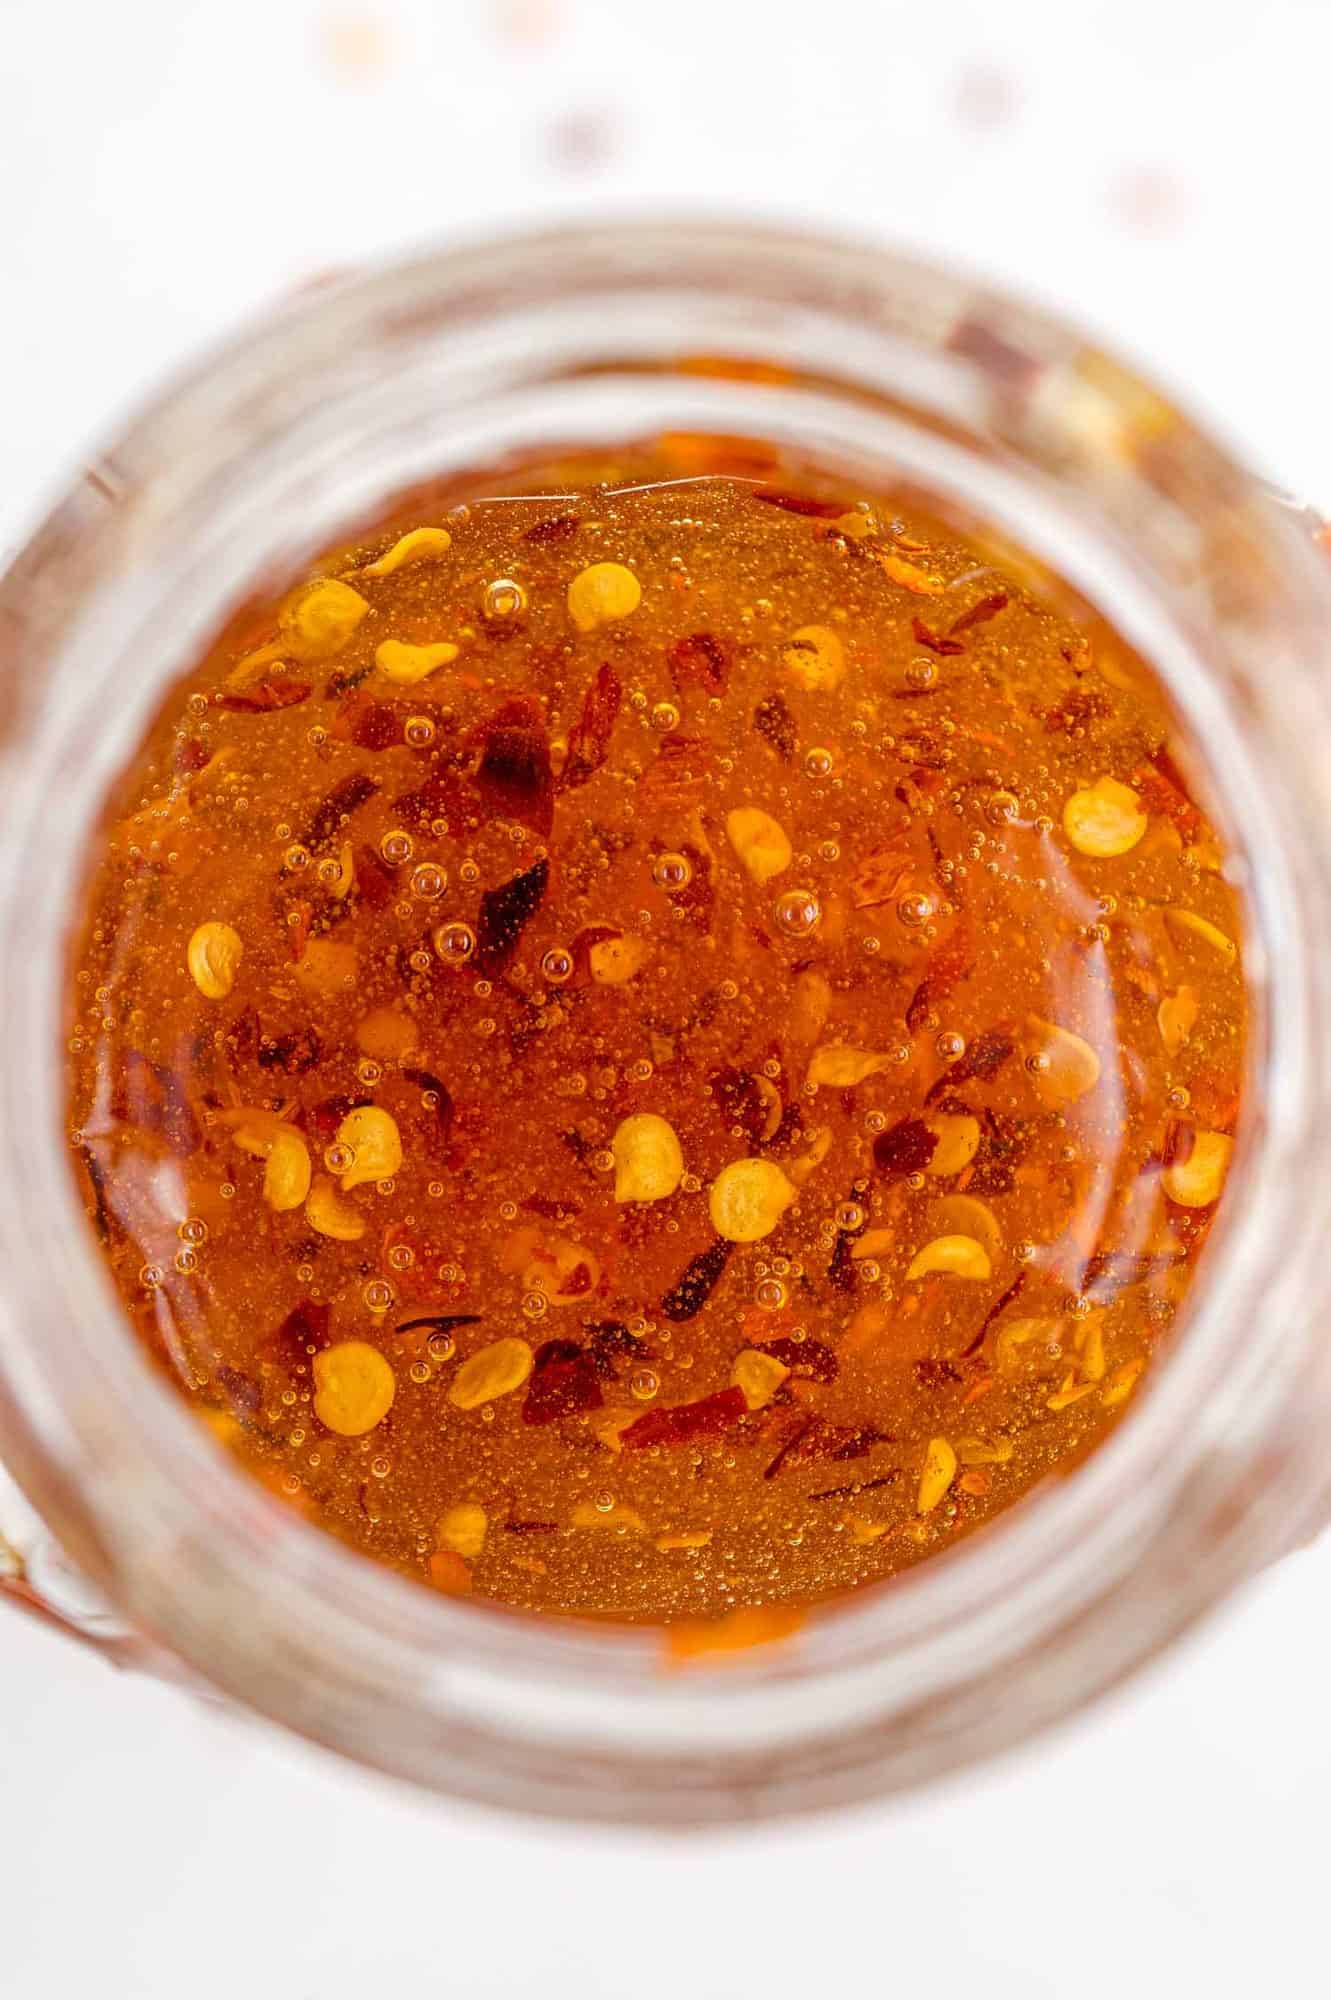 Overhead view of hot honey in a clear glass jar.